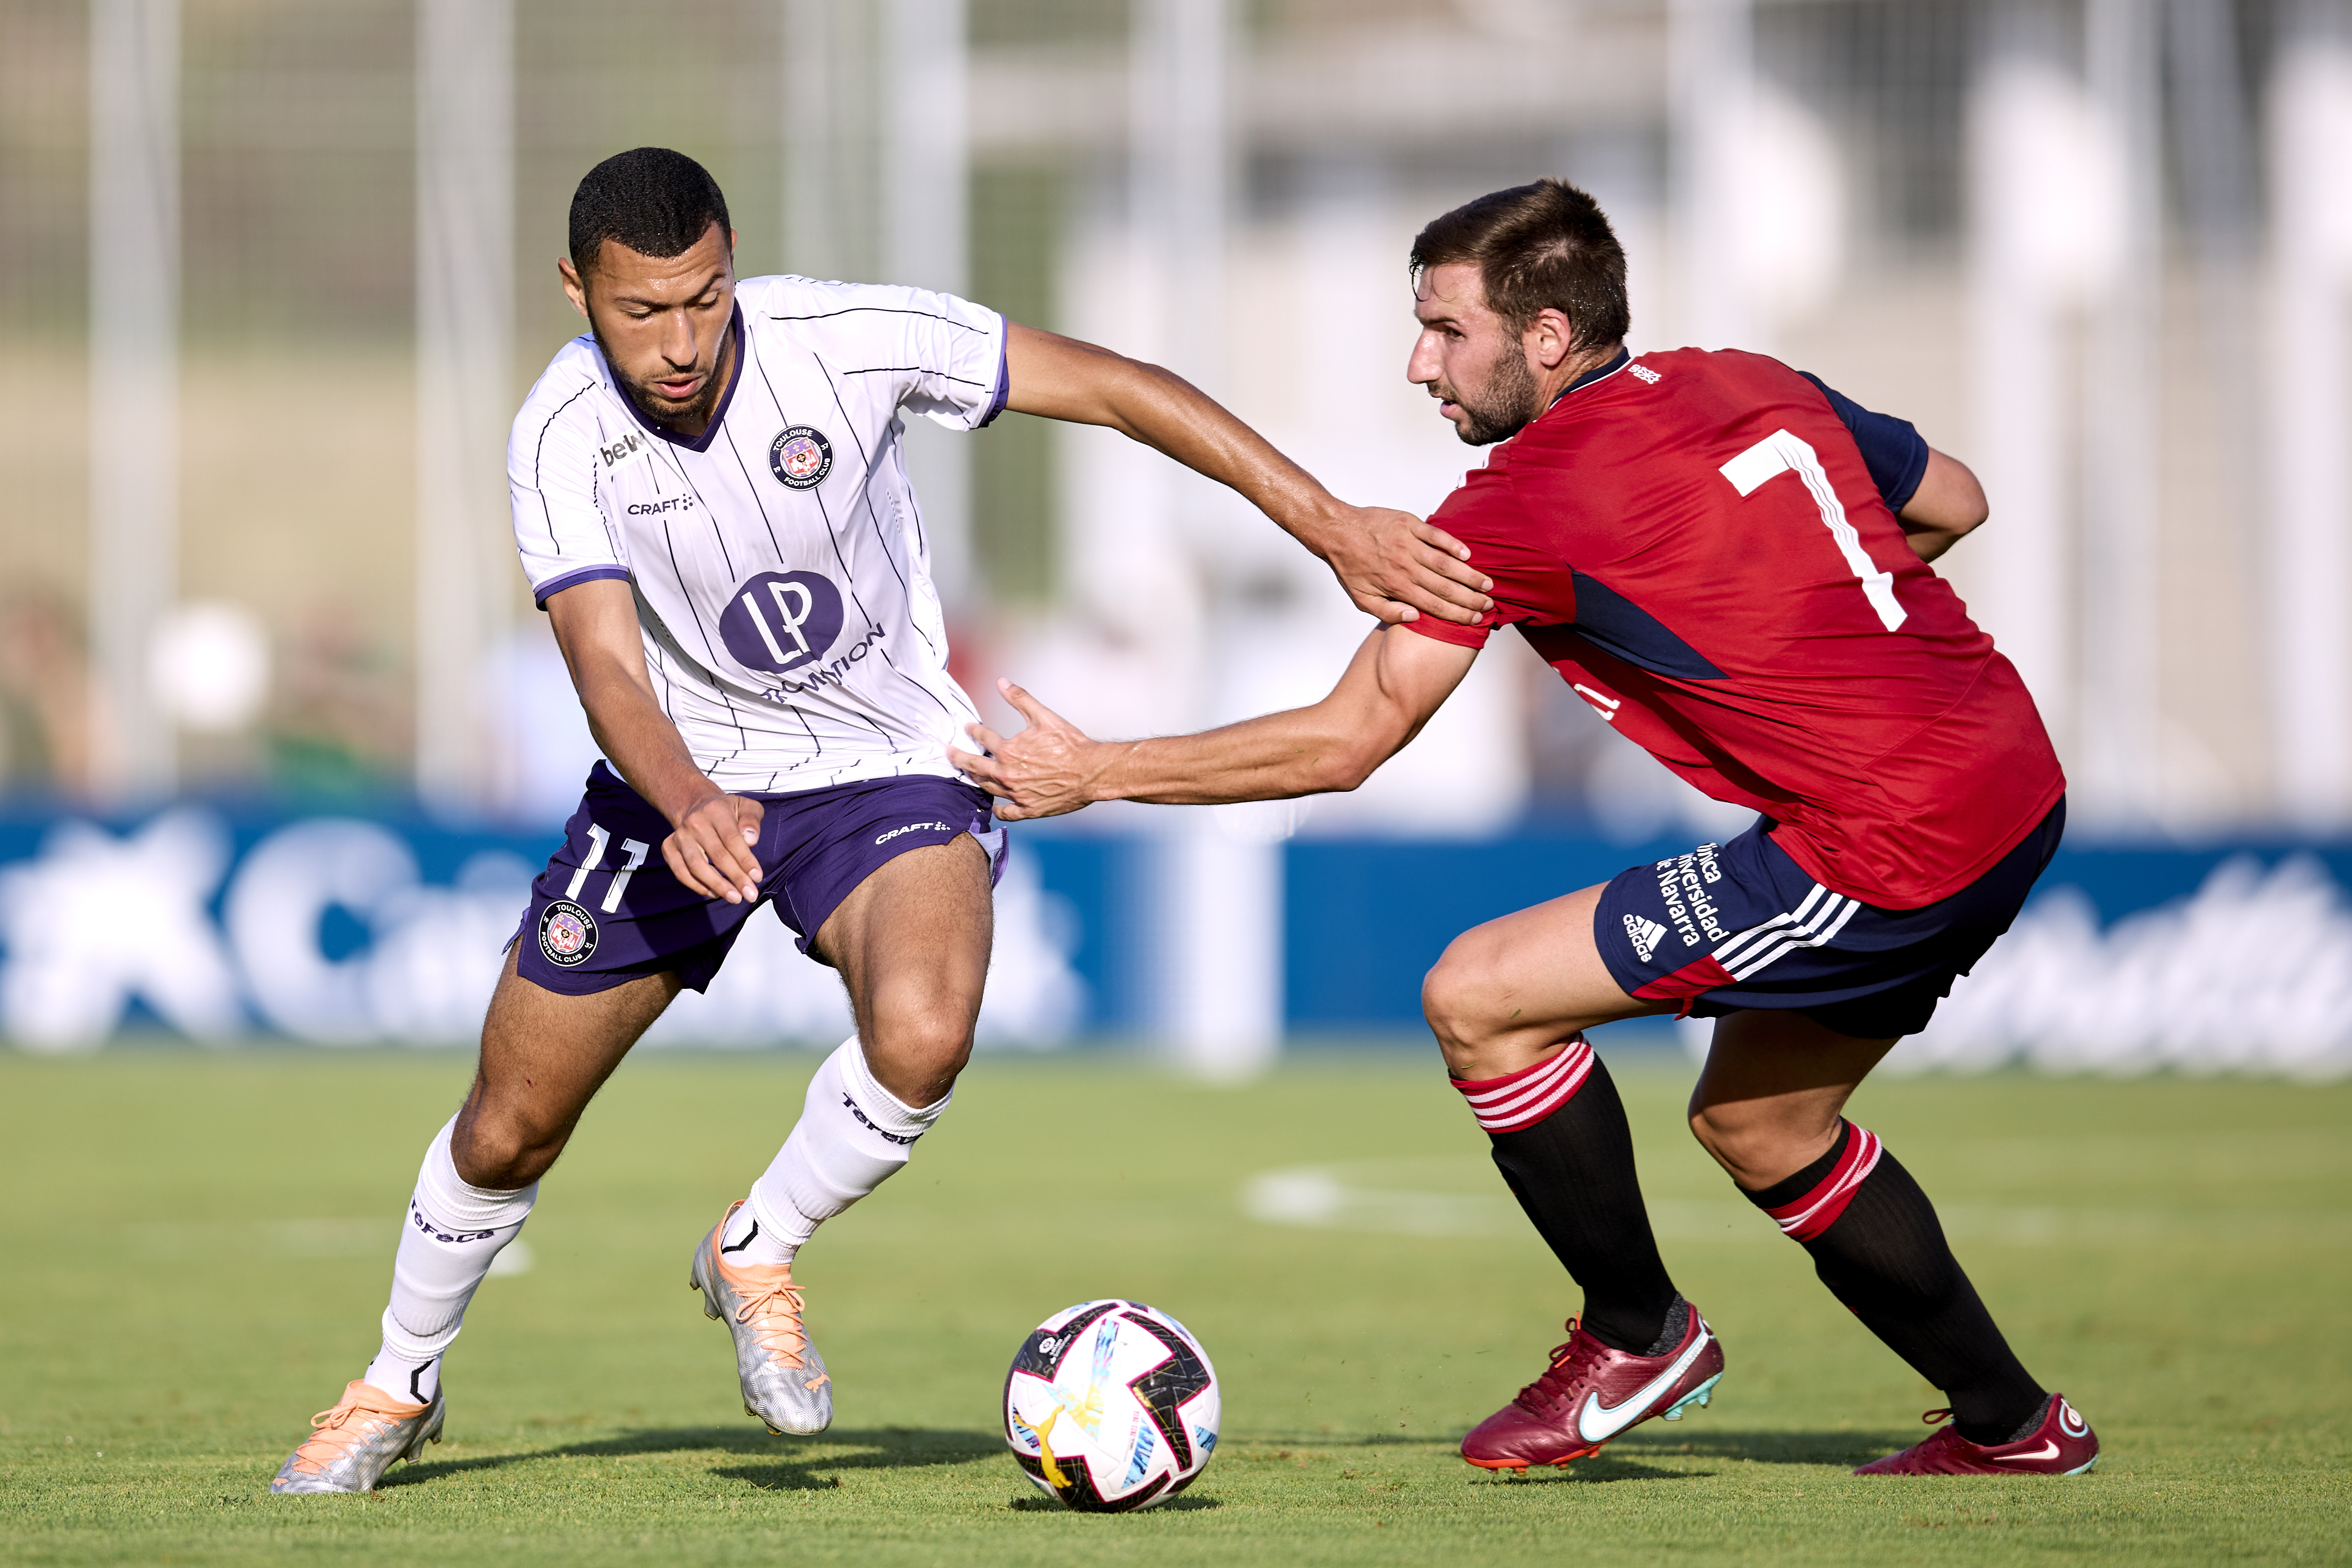 Yanis Begraoui of Toulouse Football Club compete for the ball with Jon Moncayola of CA Osasuna during the pre-season friendly match between CA Osasuna and Toulouse FC at Tajonar Sport Center on July 19, 2022 in Pamplona, Spain.